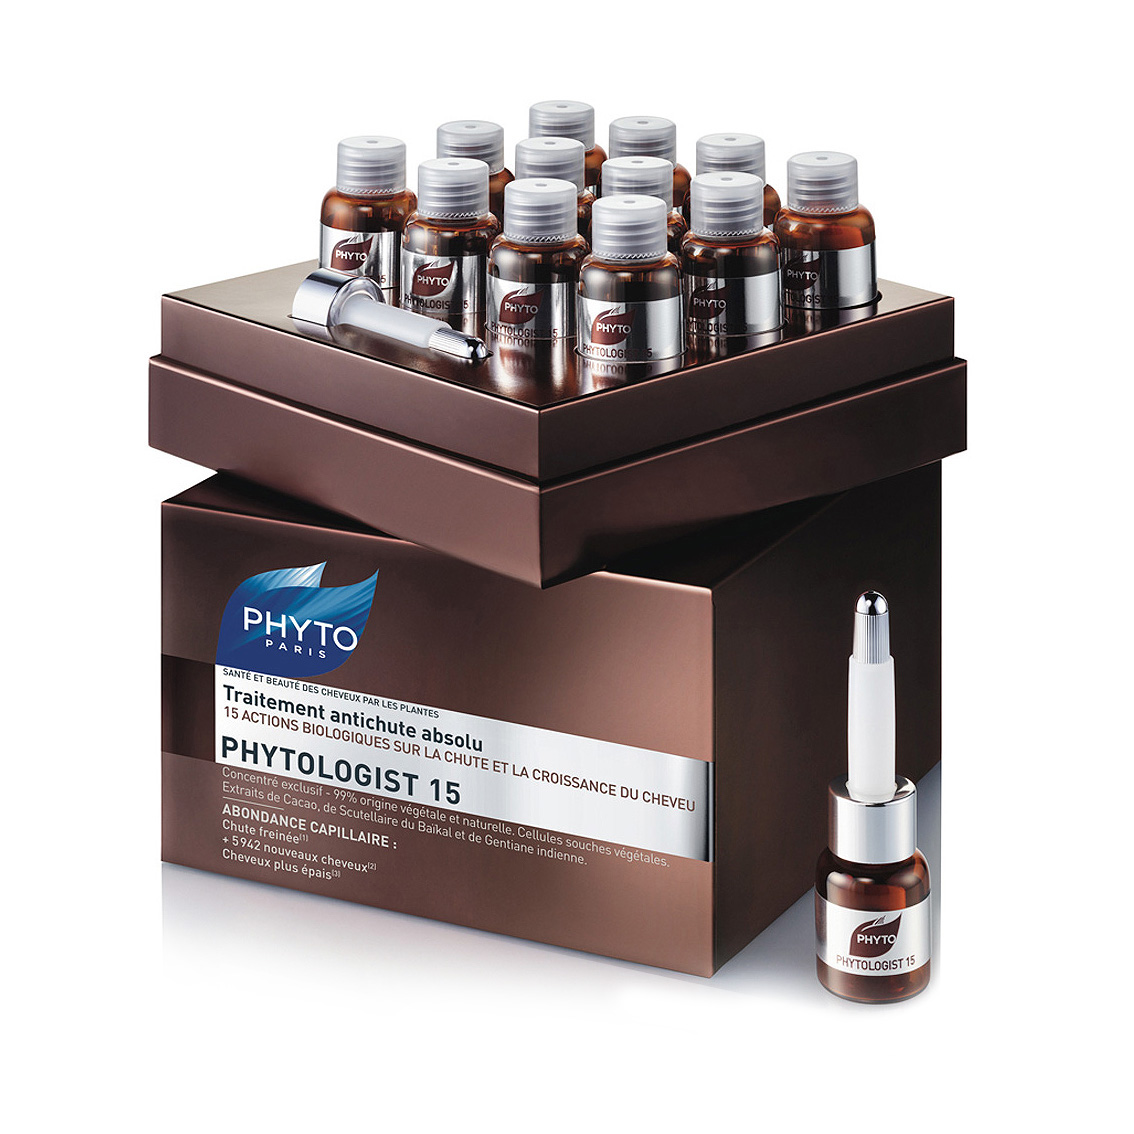 Phyto hair loss medication, available to buy in store at The Mane House in Biddenden.